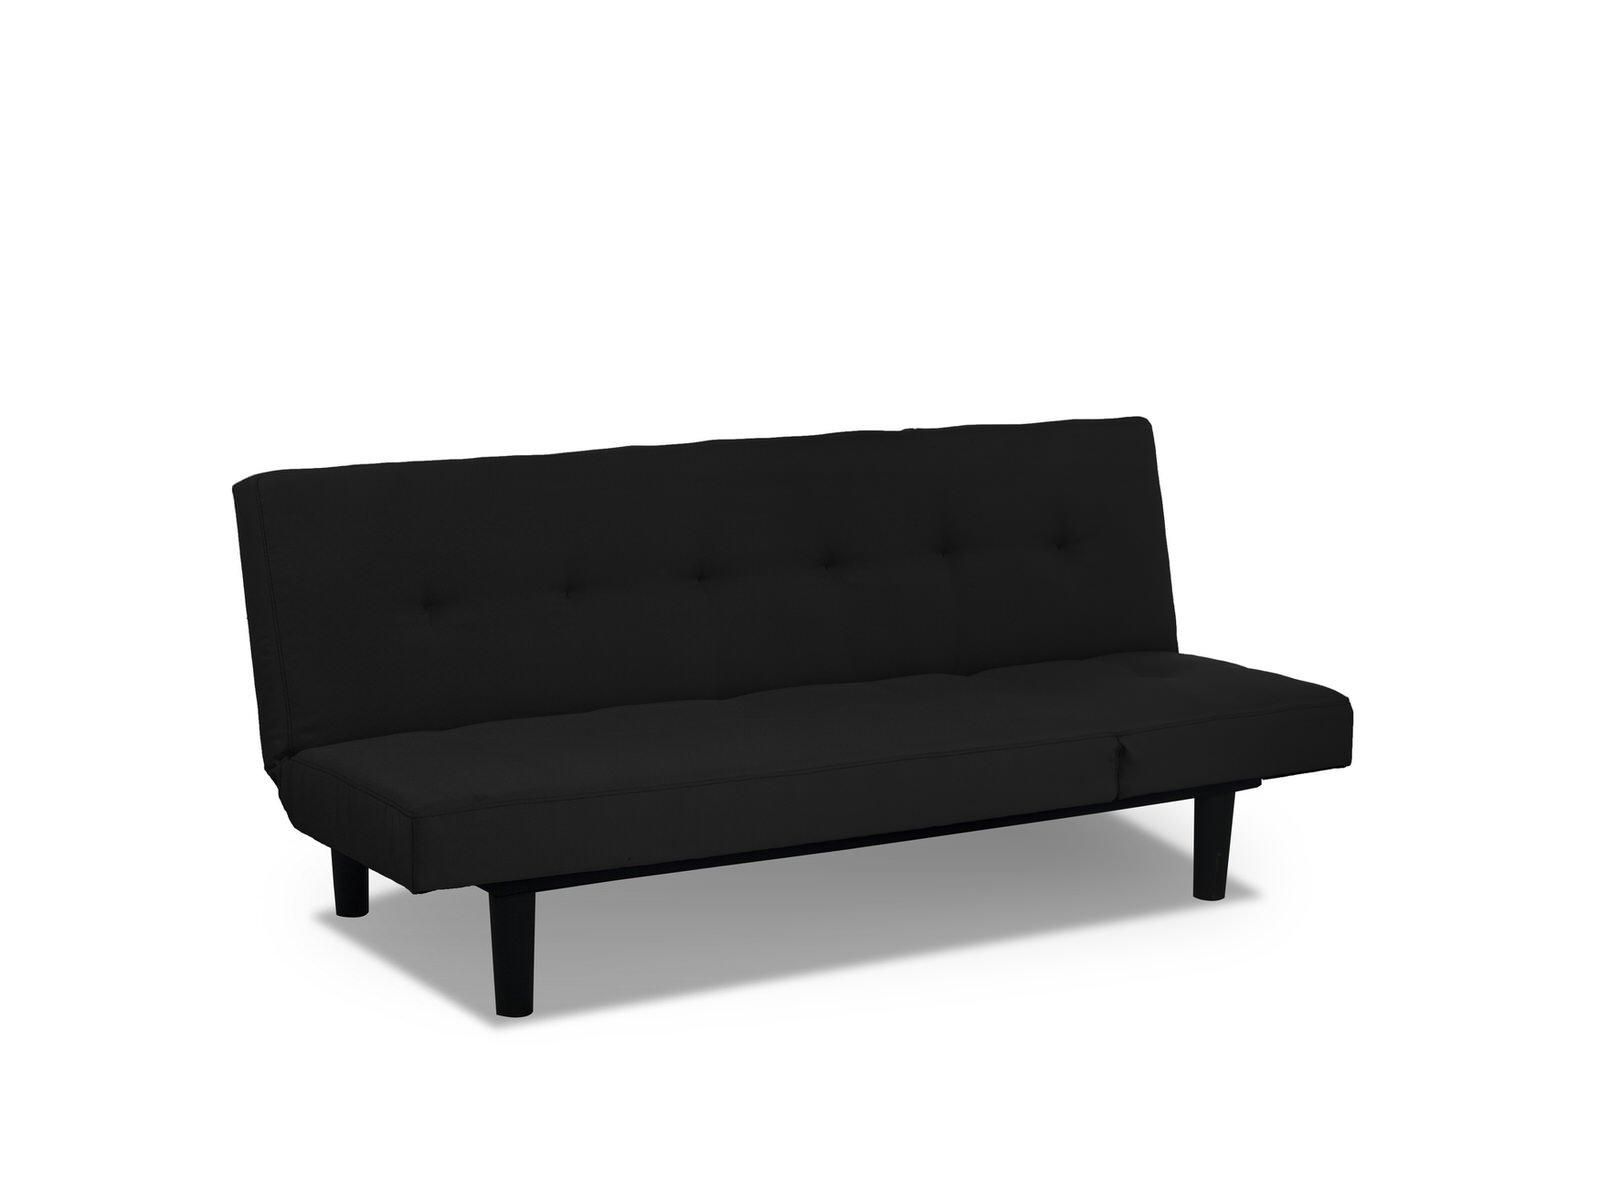 Mini Lounger Convertible Sofa Bed Blackserta / Lifestyle Intended For Mini Sofa Beds (Photo 17 of 20)